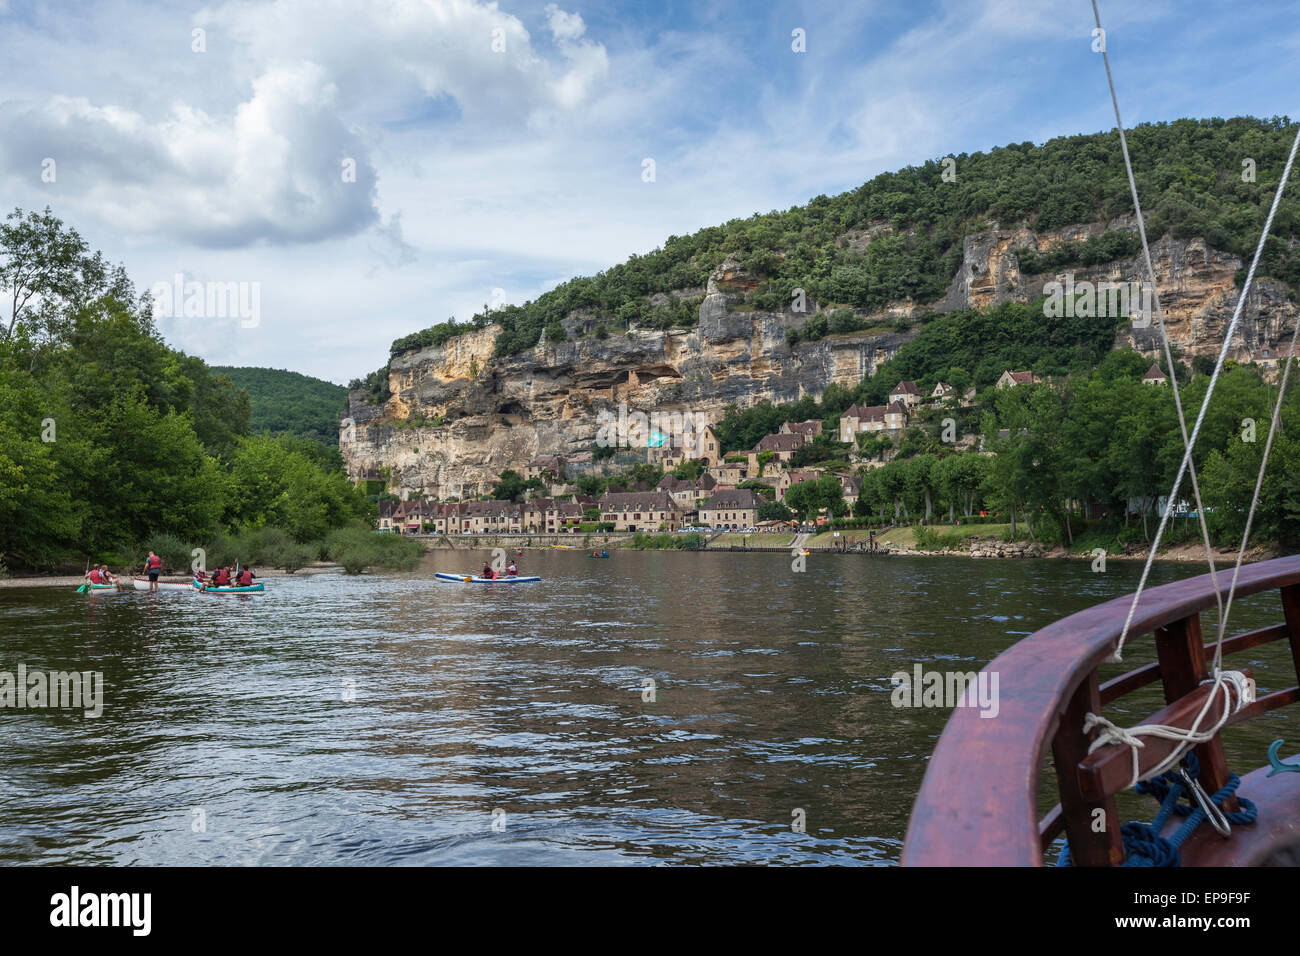 Canoeing on the river Dordogne at La Roque-Gageac, Dordogne, France with the rocky cliffs and village in the background against a blue sky with clouds Stock Photo